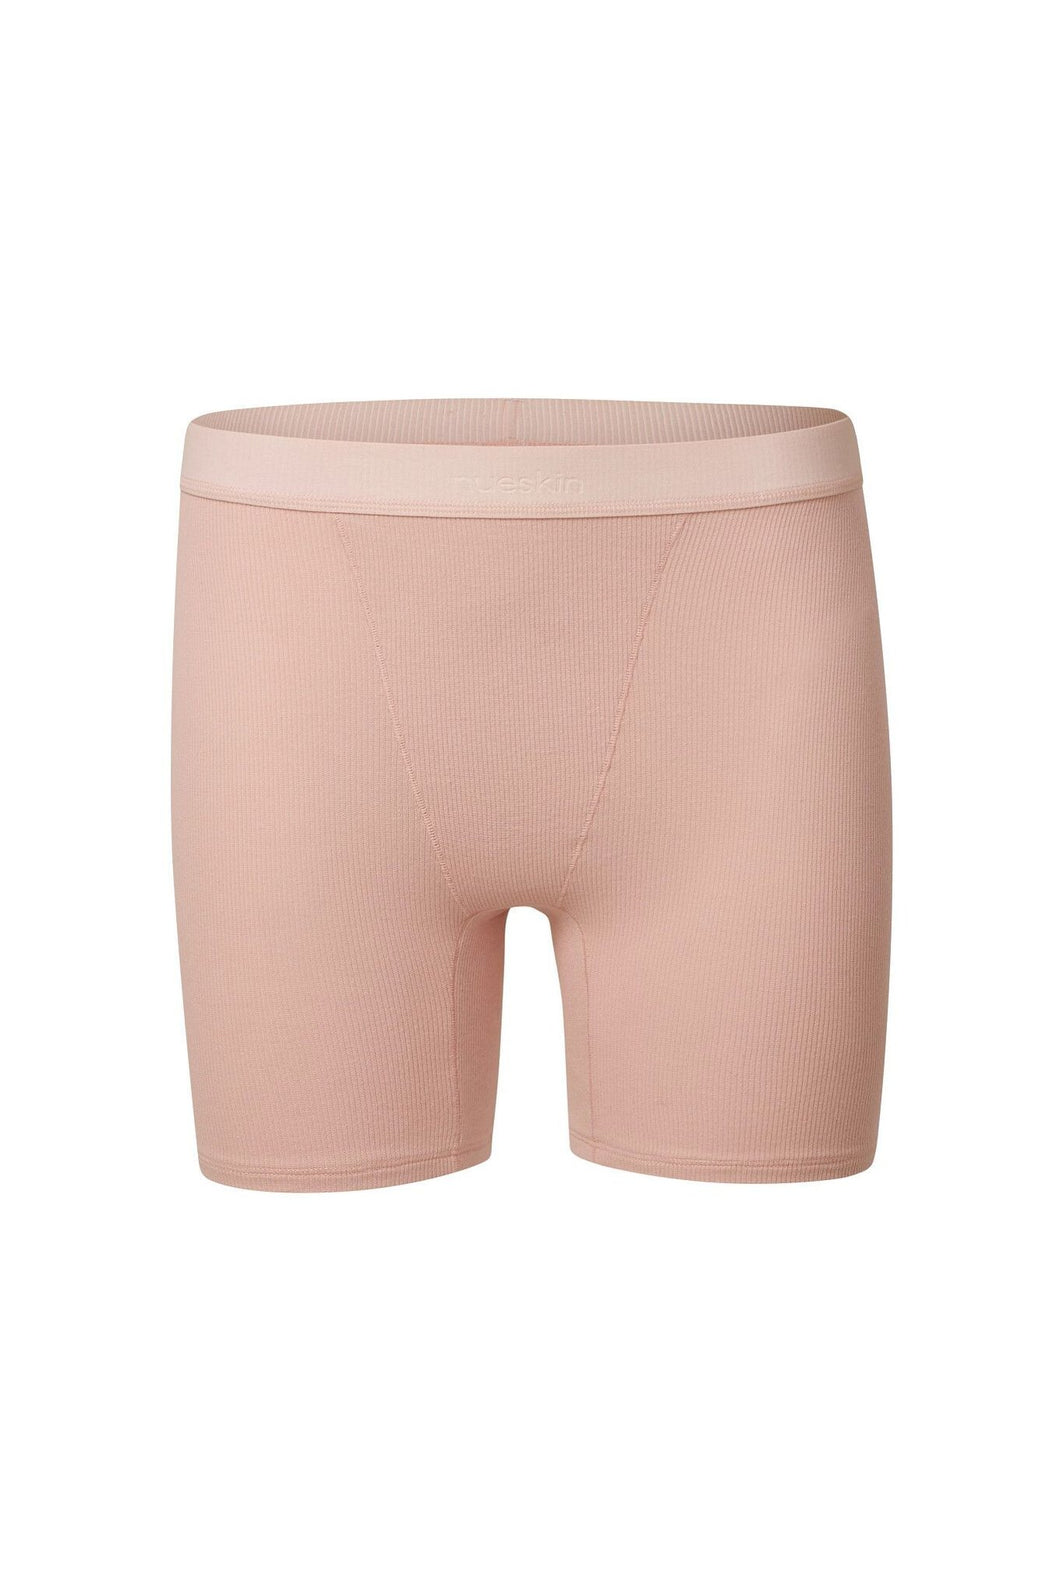 nueskin Hena Rib Cotton Shorts in color Rose Cloud and shape shortie